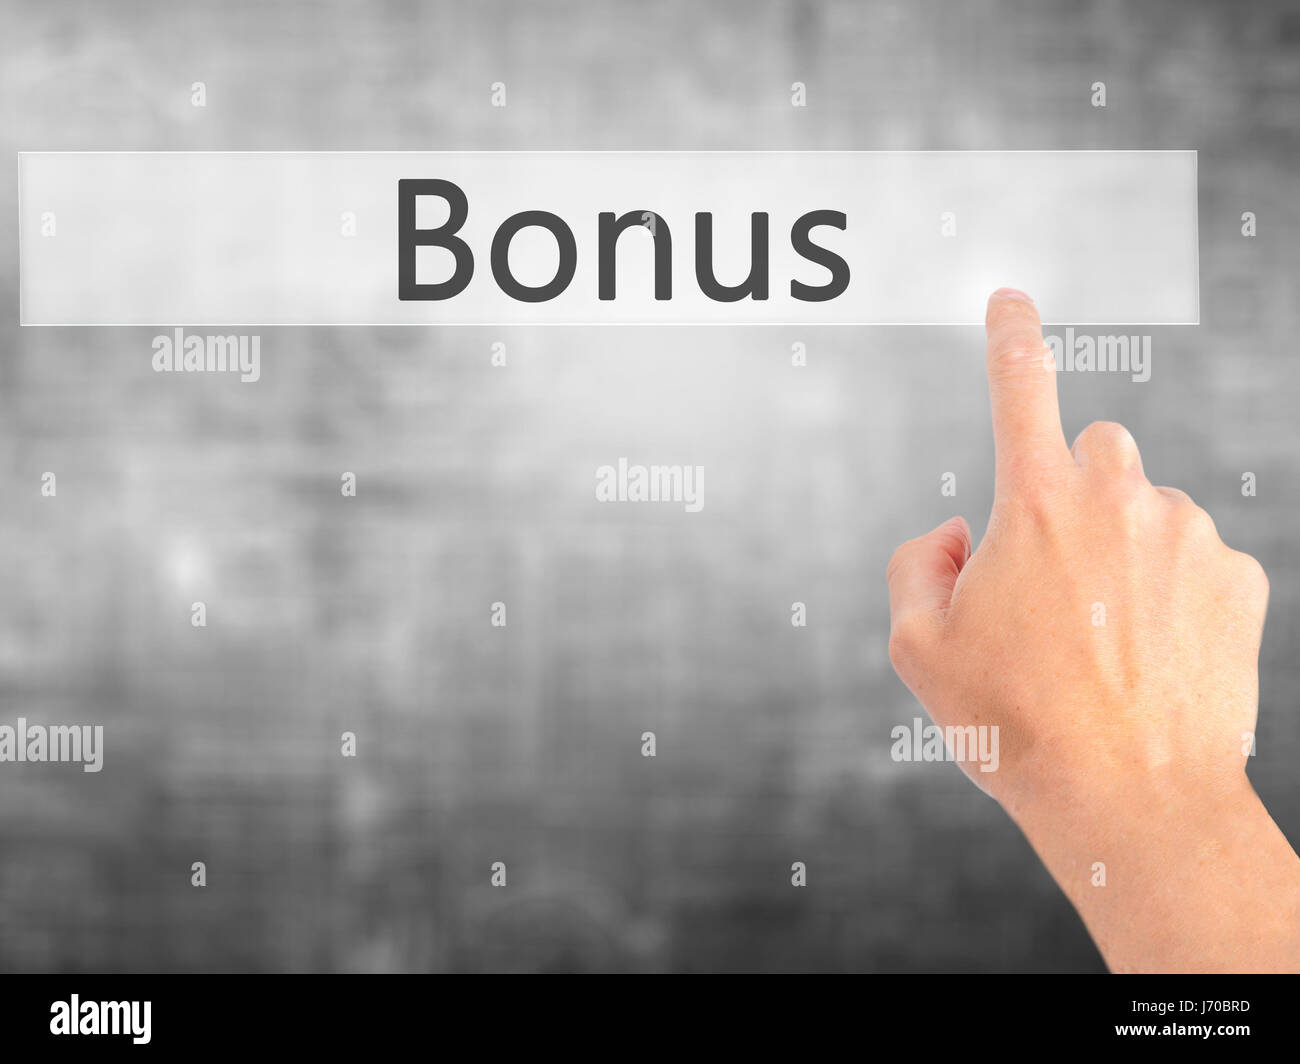 Bonus - Hand pressing a button on blurred background concept . Business, technology, internet concept. Stock Photo Stock Photo